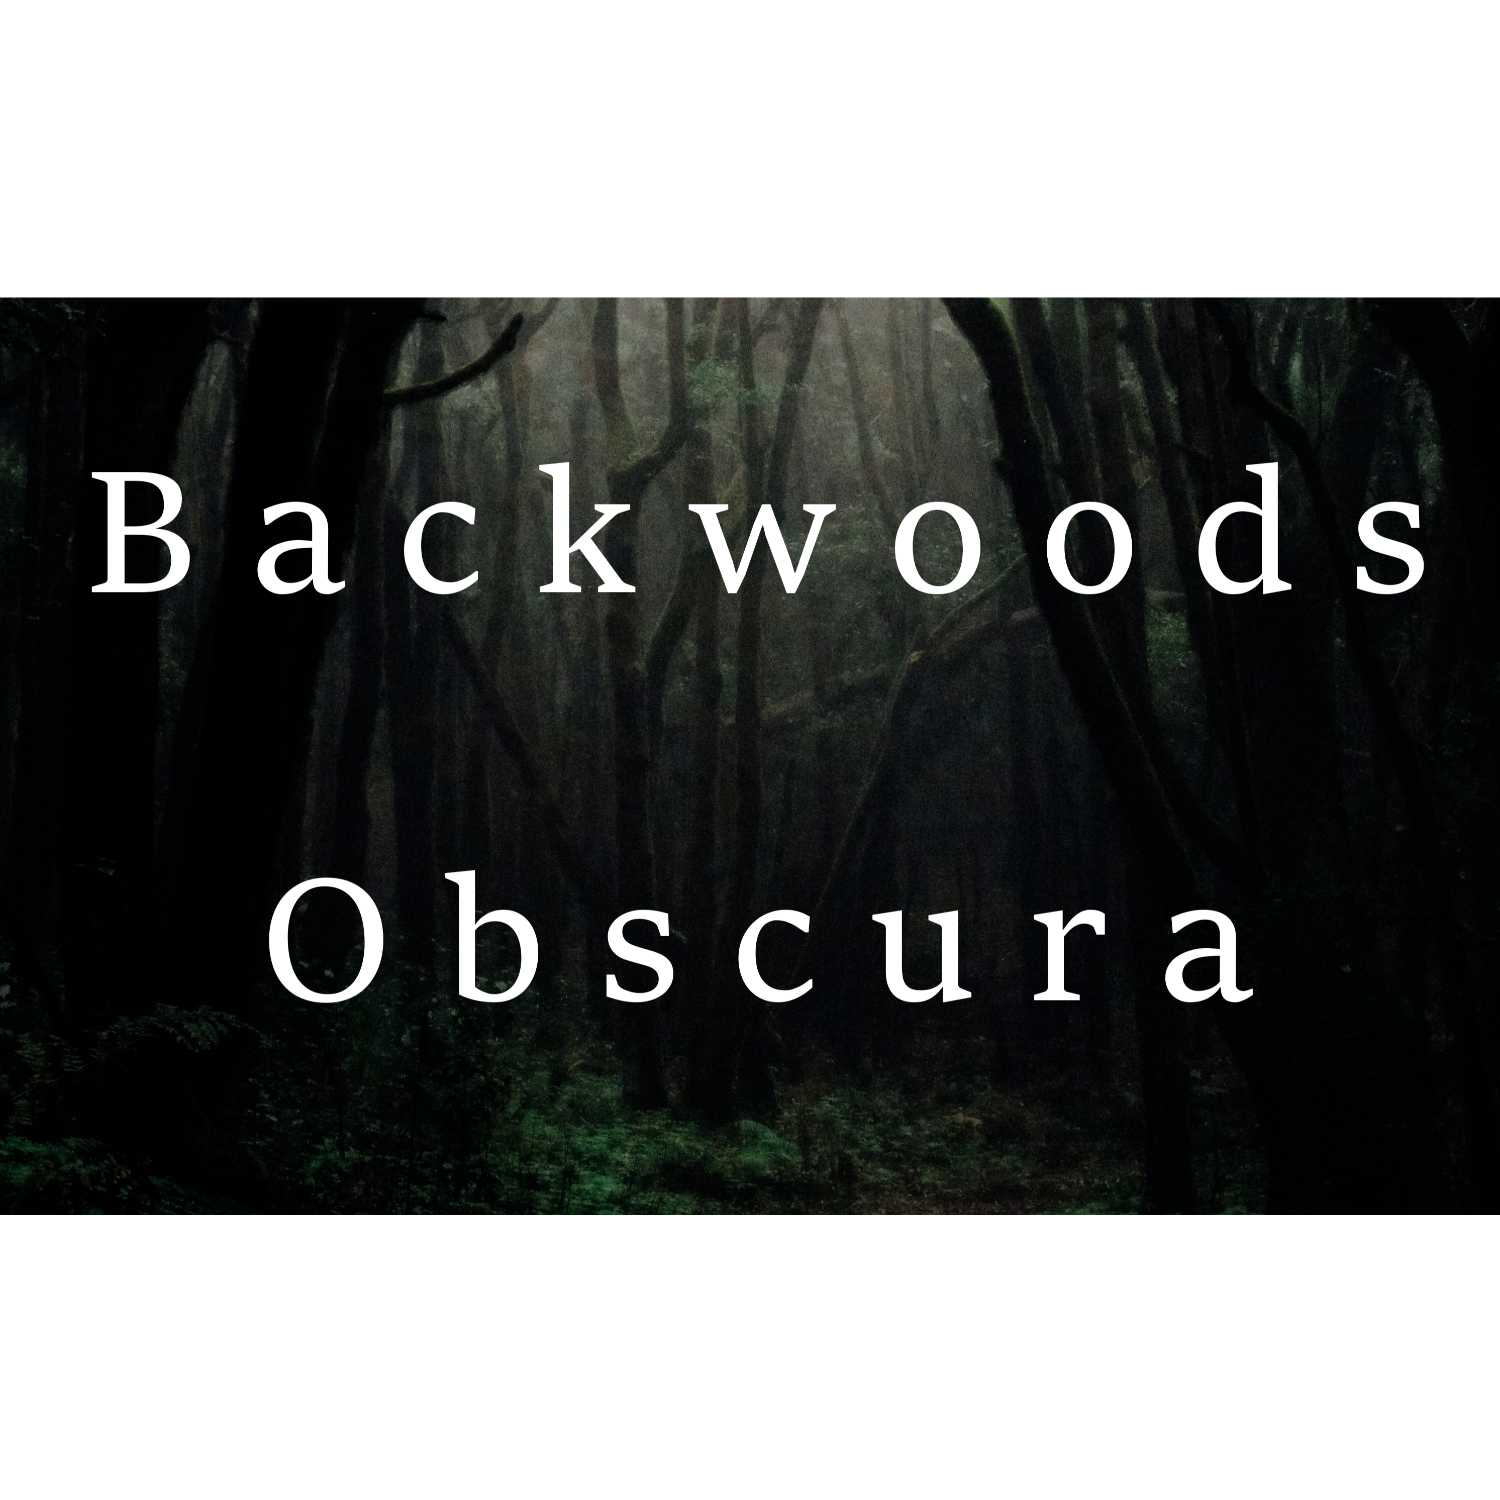 0102 - The Curse of The Rougarou - Louisiana’s Werewolf - Backwoods Obscura